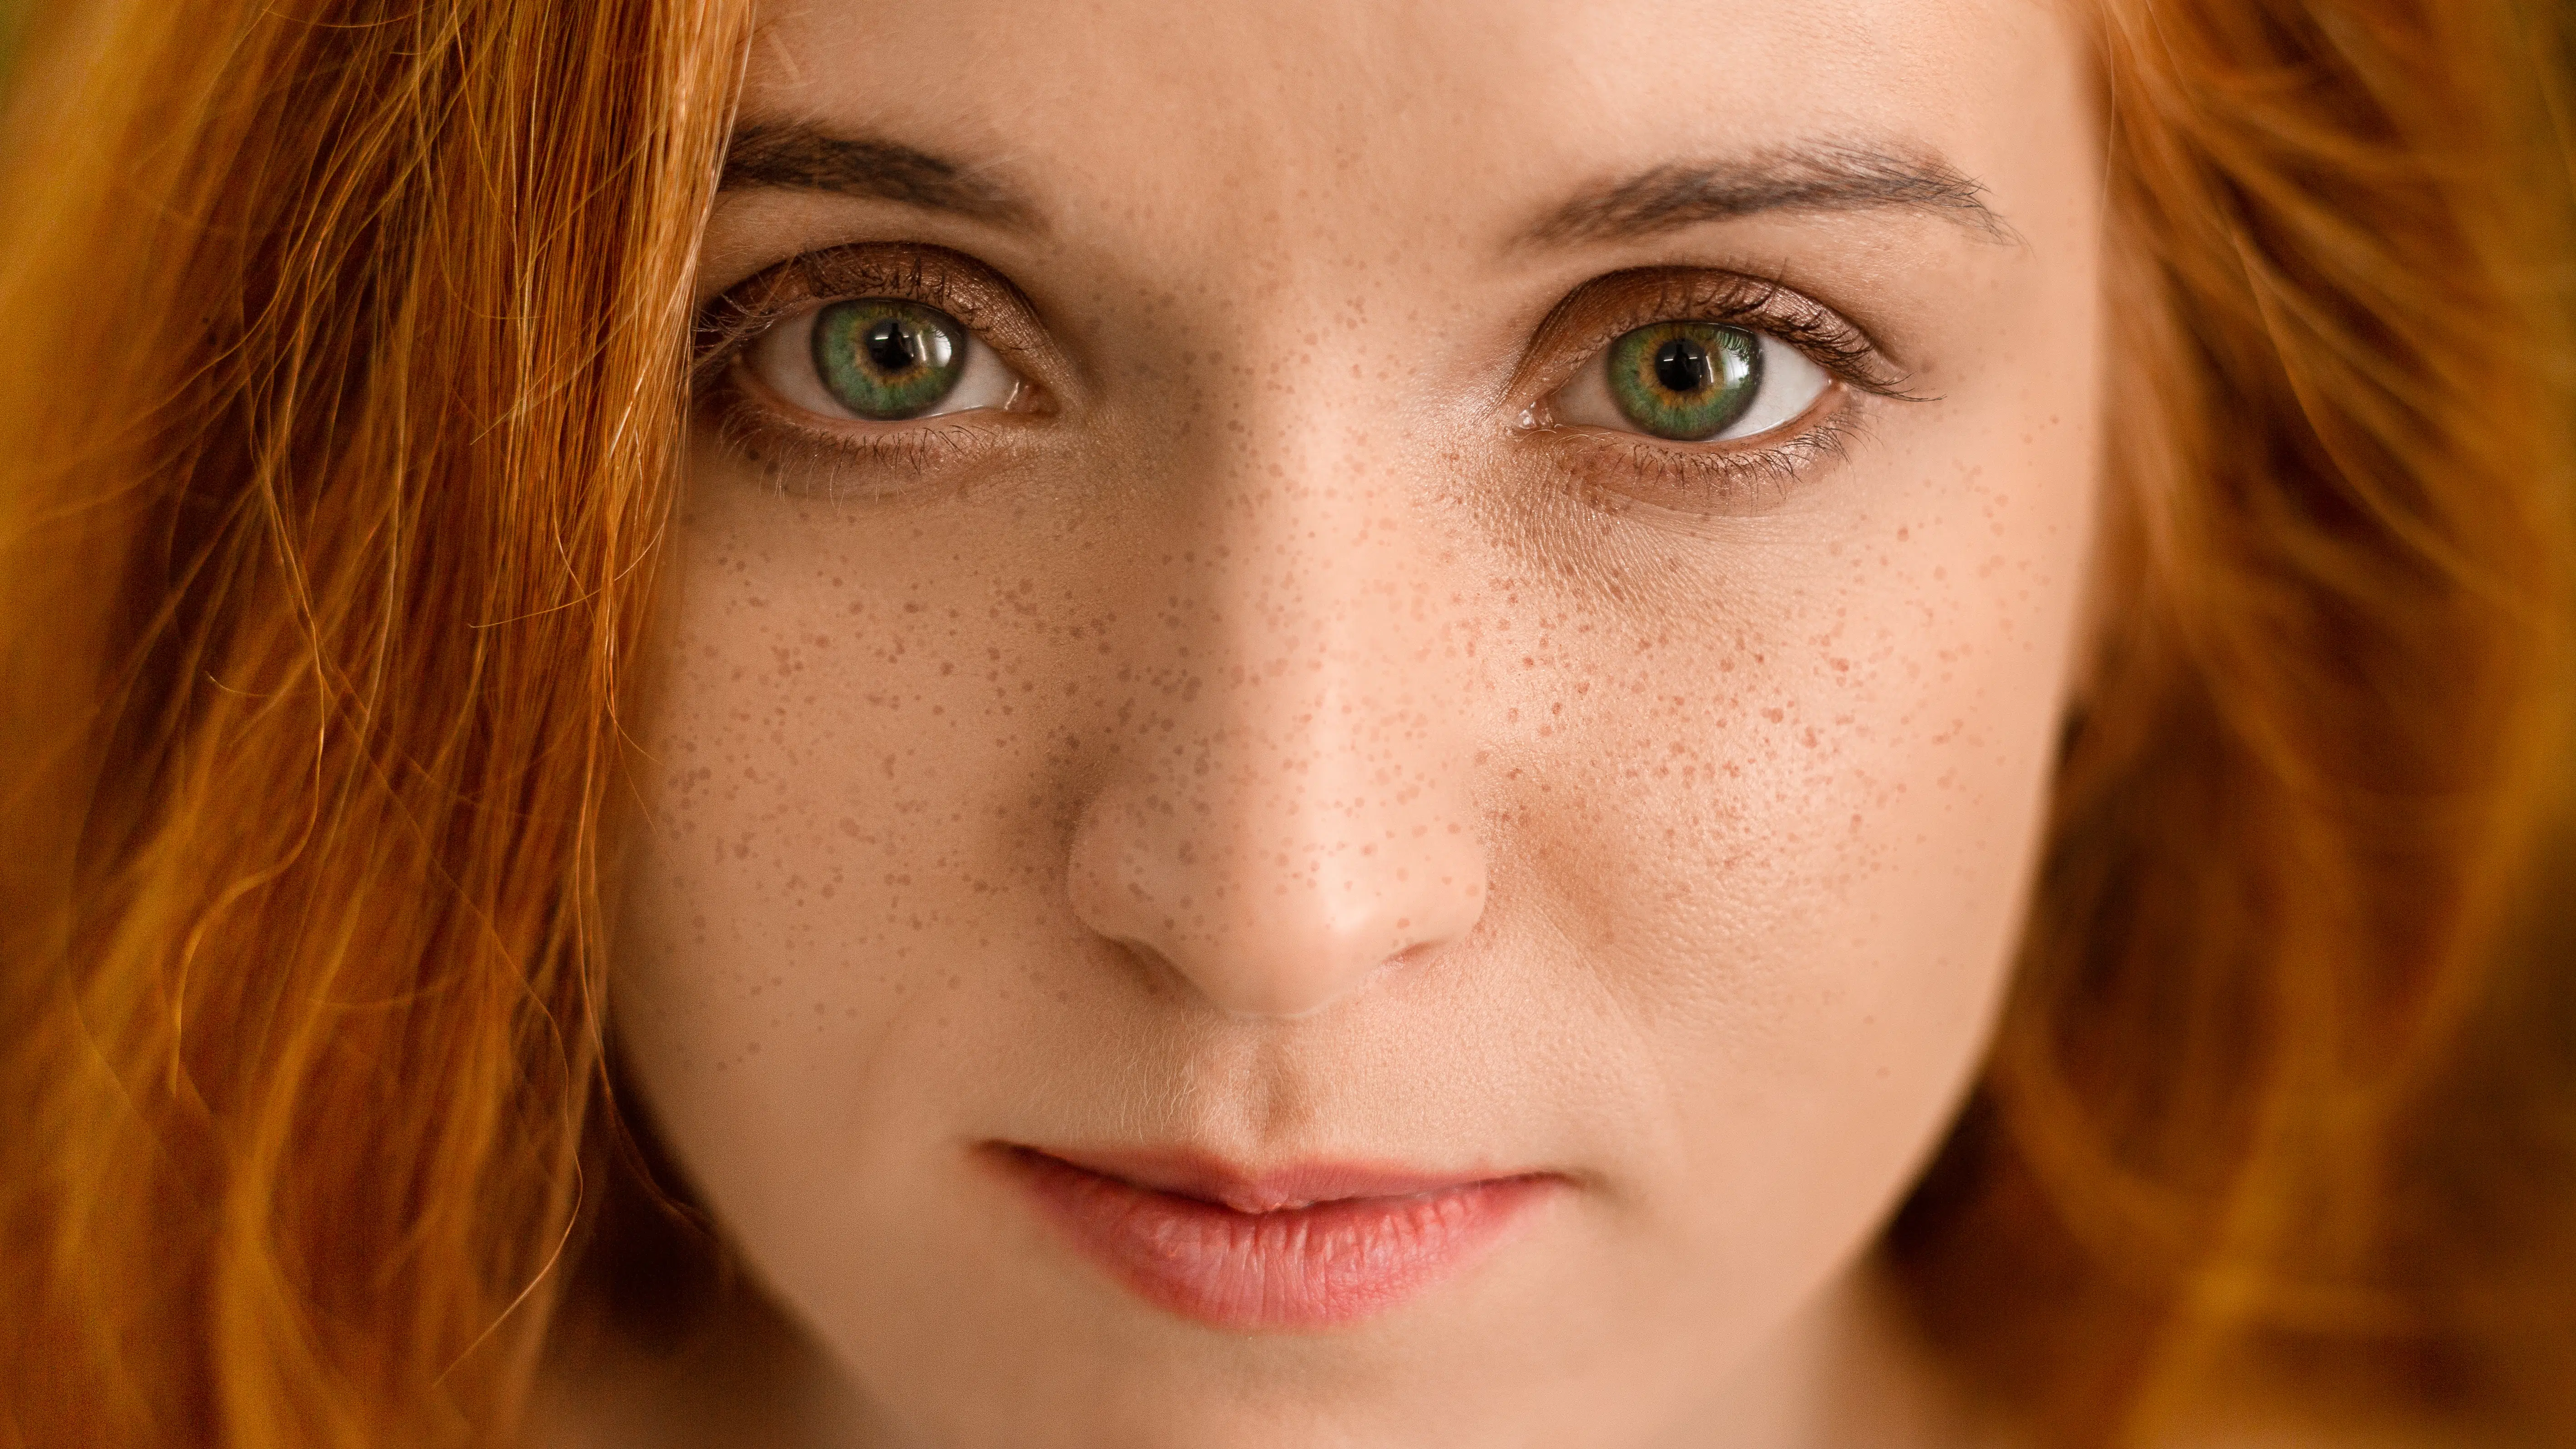 Young redhead woman with freckles looking at camera